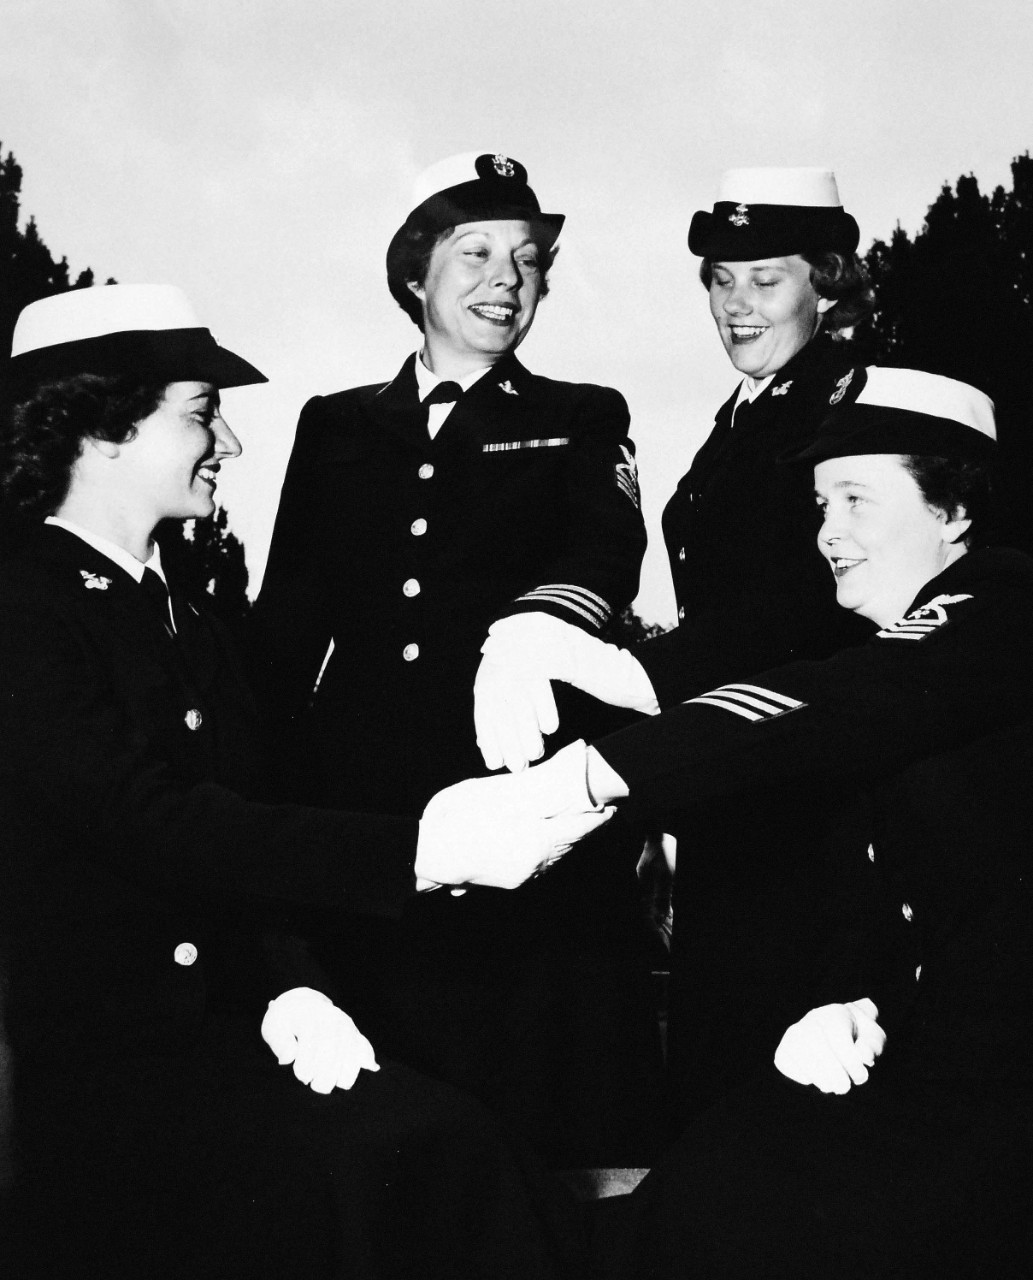 USN 709490:   WAVE Veterans on 13th Anniversary of the WAVES, July 1955.  Two veterans who have served with the WAVES since inception, in 1942, display their gold stripes.   Two WAVE “Boots” look on.    Shown, left to right:   Seaman Apprentice Laura Quaid; Chief Yeoman Leo; Seaman Apprentice Virginia Scott; and Chief Storekeeper Margaret Gay.   Master Caption:  WAVES Observe 13th Anniversary:   Preparatory to their Thirteenth Anniversary, July 30, WAVE Recruits at the Naval Training Center, Bainbridge, Maryland, pass in review.  These young women will take their places with sailors in important technical and clerical duty assignments both at home and abroad.  At that time, there were approximately 7,000 WAVES on active duty in the U.S. Navy.   Photograph released July 25, 1955.  Official U.S. Navy photograph, now in the collections of the National Archives.   